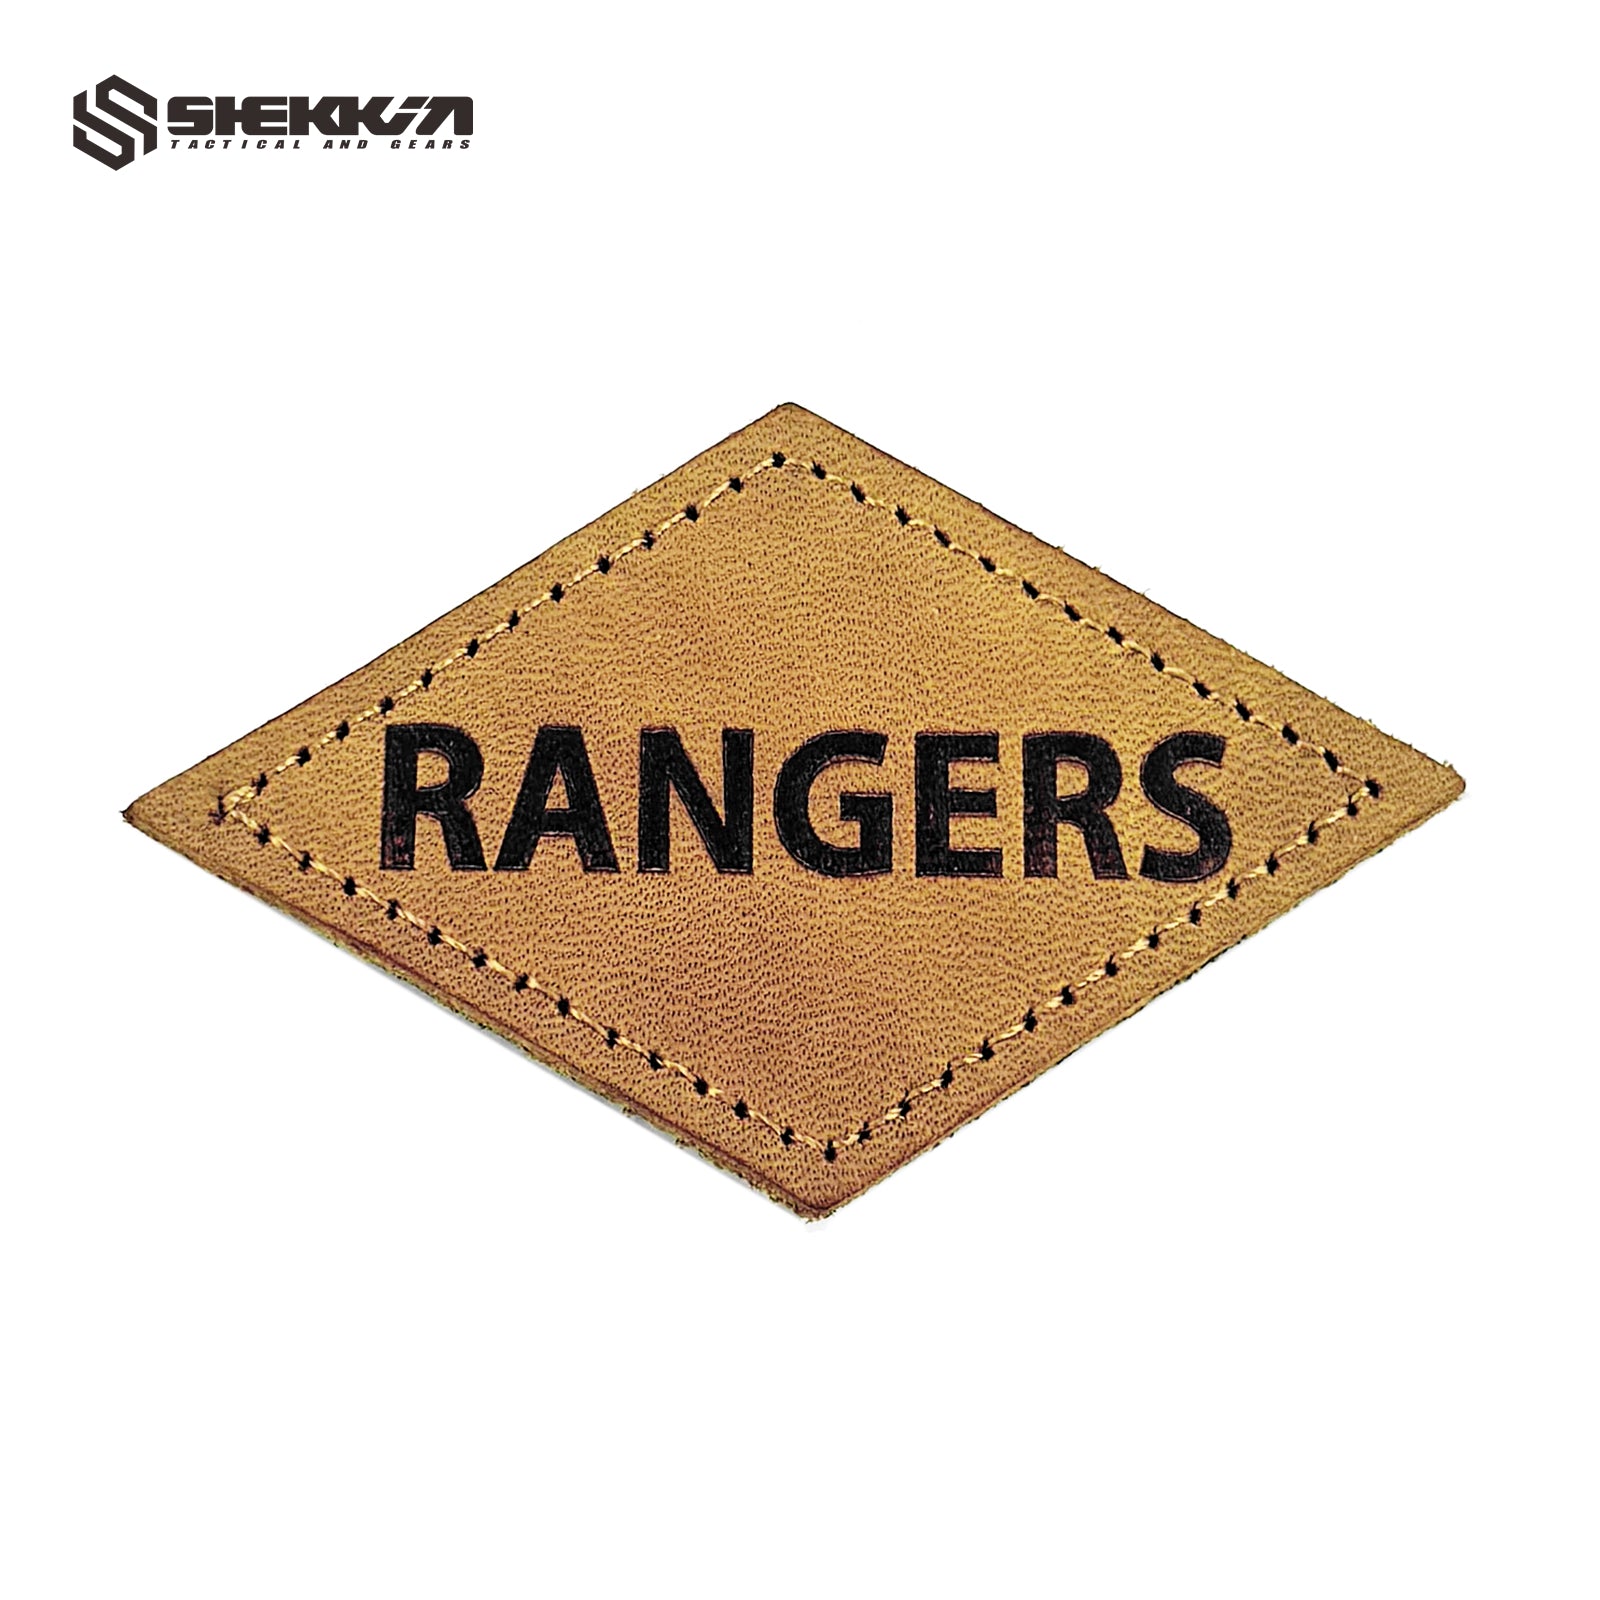 RANGERS Leather Patch